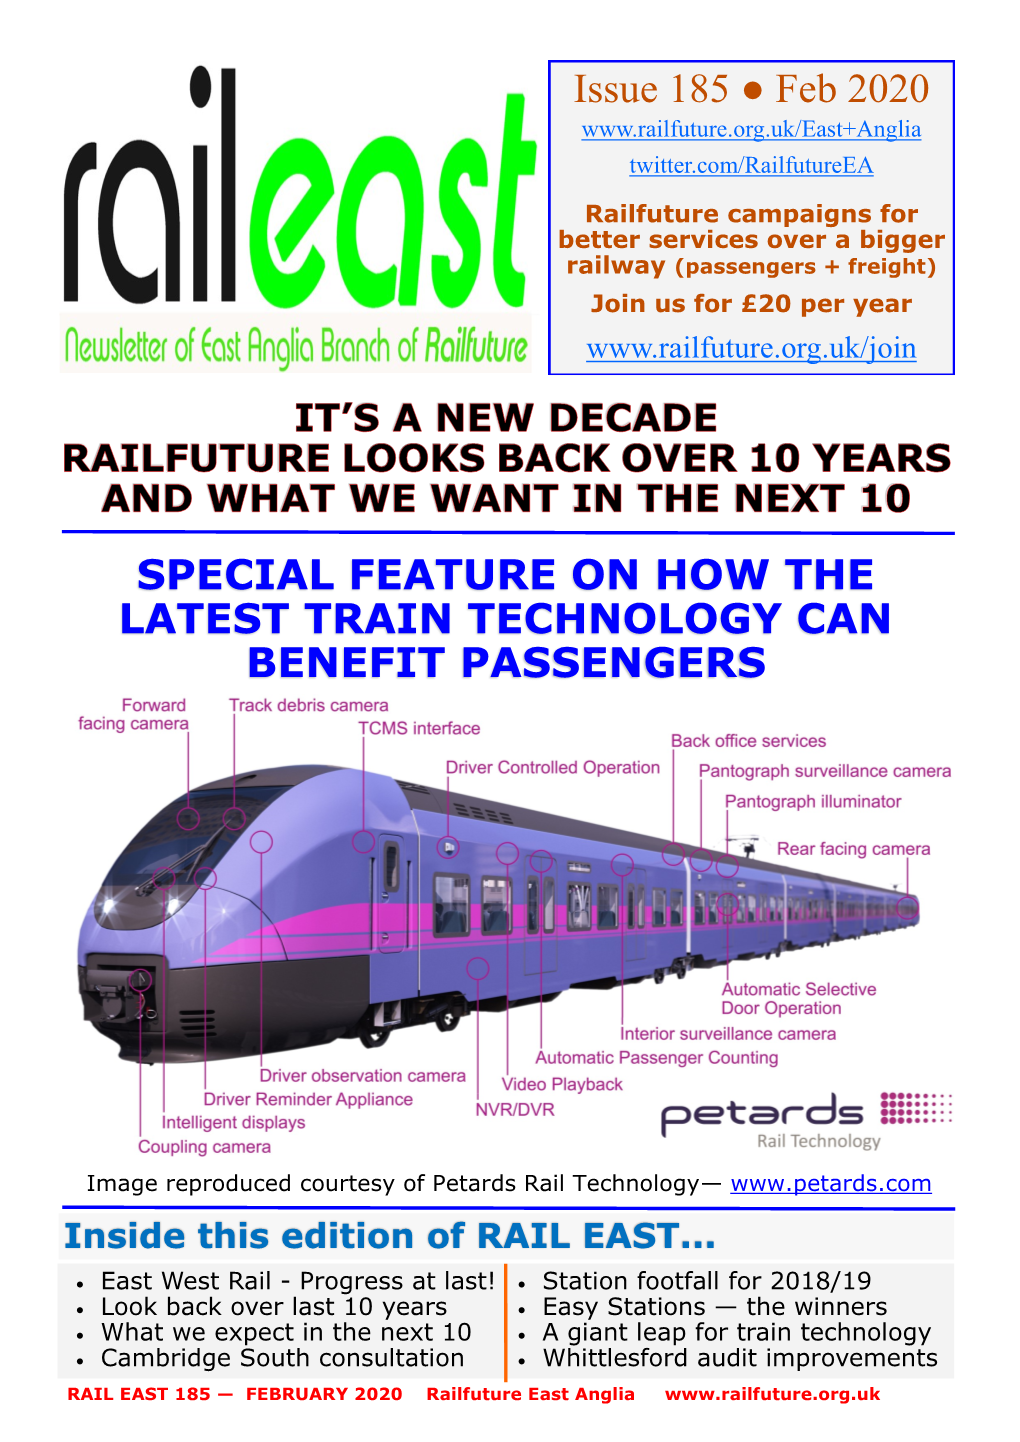 Issue 185 Feb 2020 SPECIAL FEATURE on HOW the LATEST